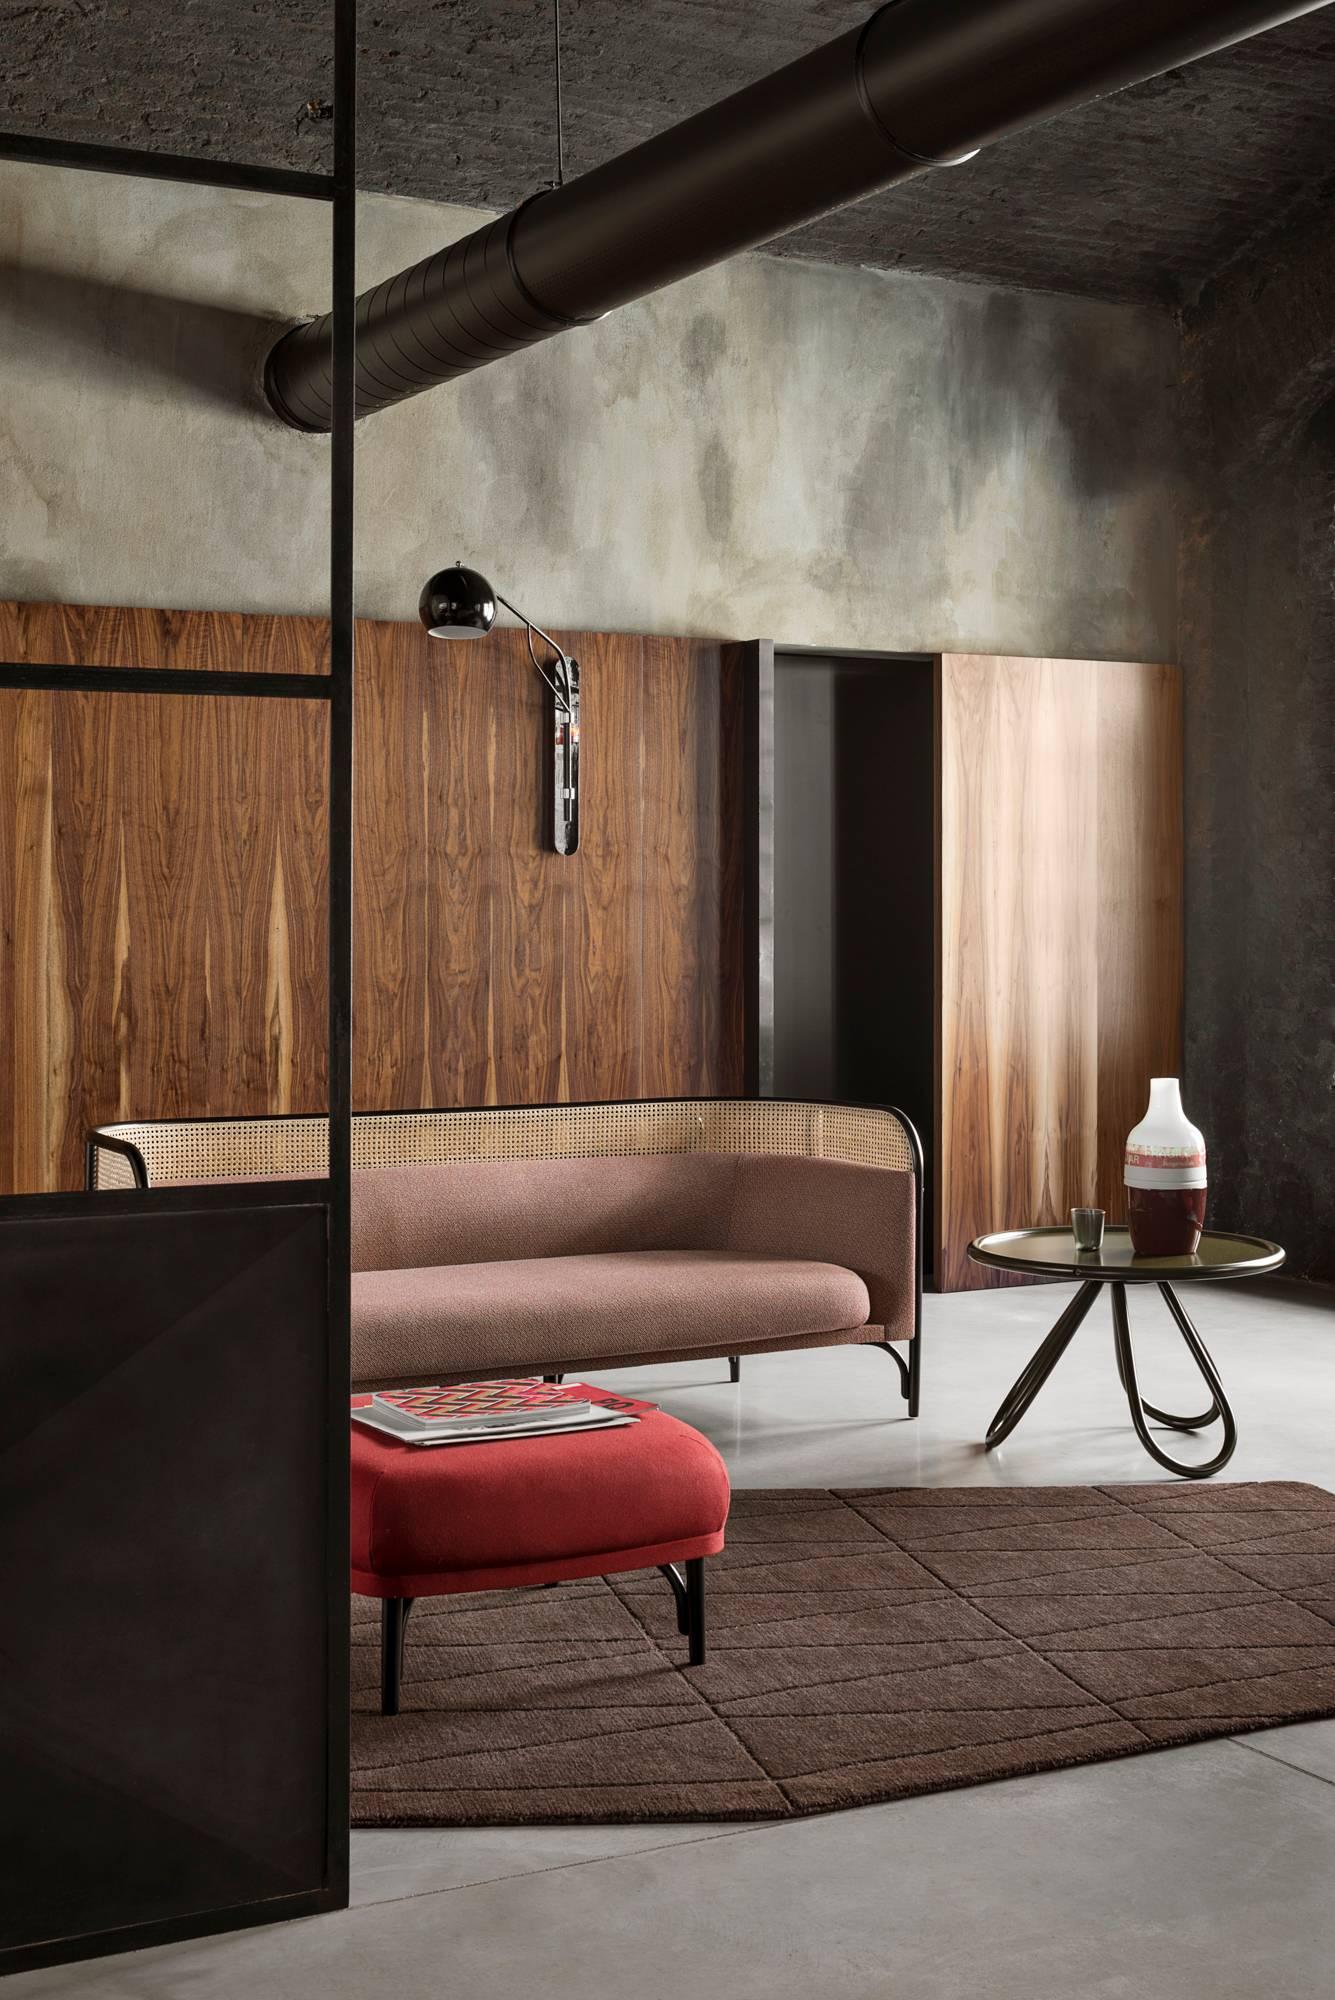 Wiener GTV design's collection of upholstery suggests a new concept of comfort designed by GamFratesi, the Italian-Danish designer duo Stine Gam and Enrico Fratesi. Targa is a family consisting of an elegant two-seater (160 cm) or three-seat (200